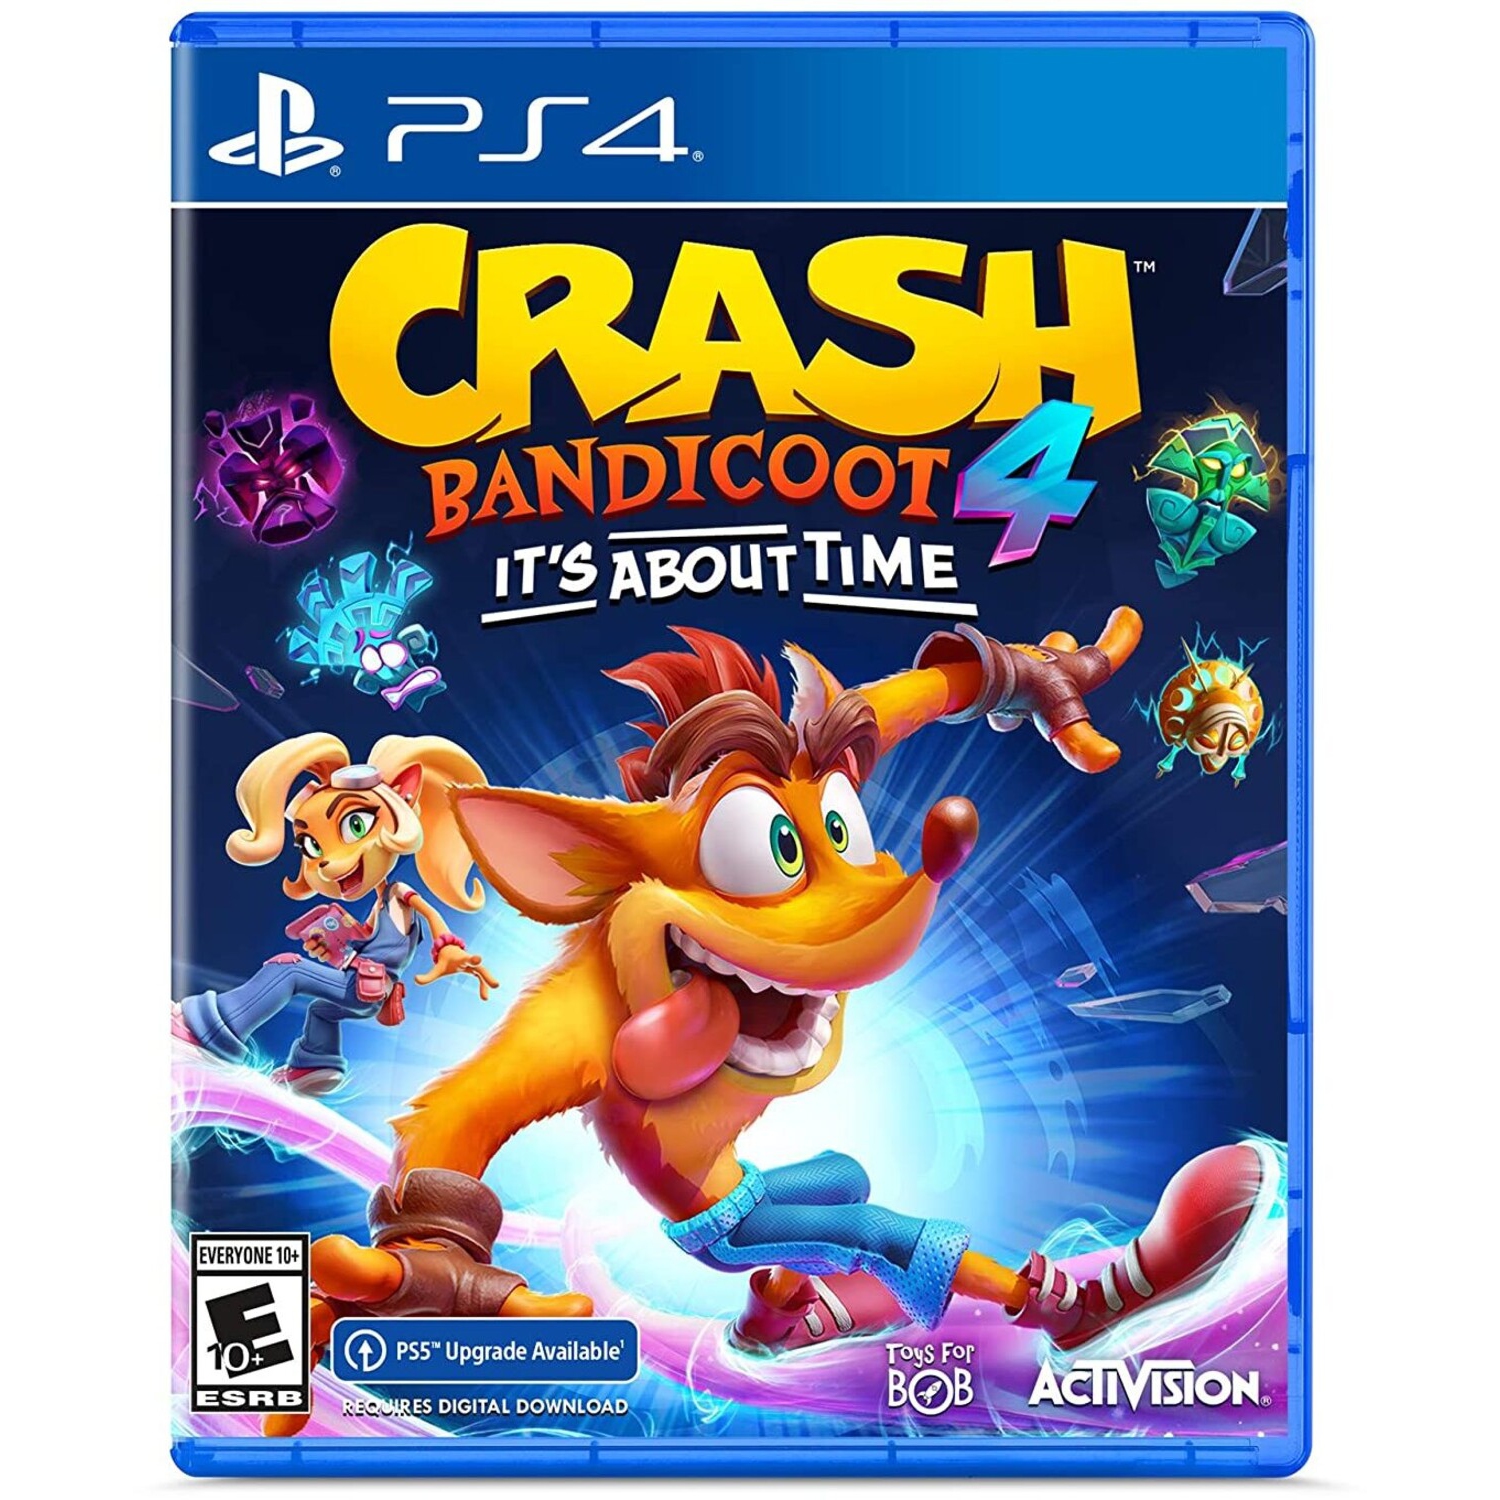 Crash Bandicoot 4: It's About Time for PlayStation 4 [VIDEOGAMES]